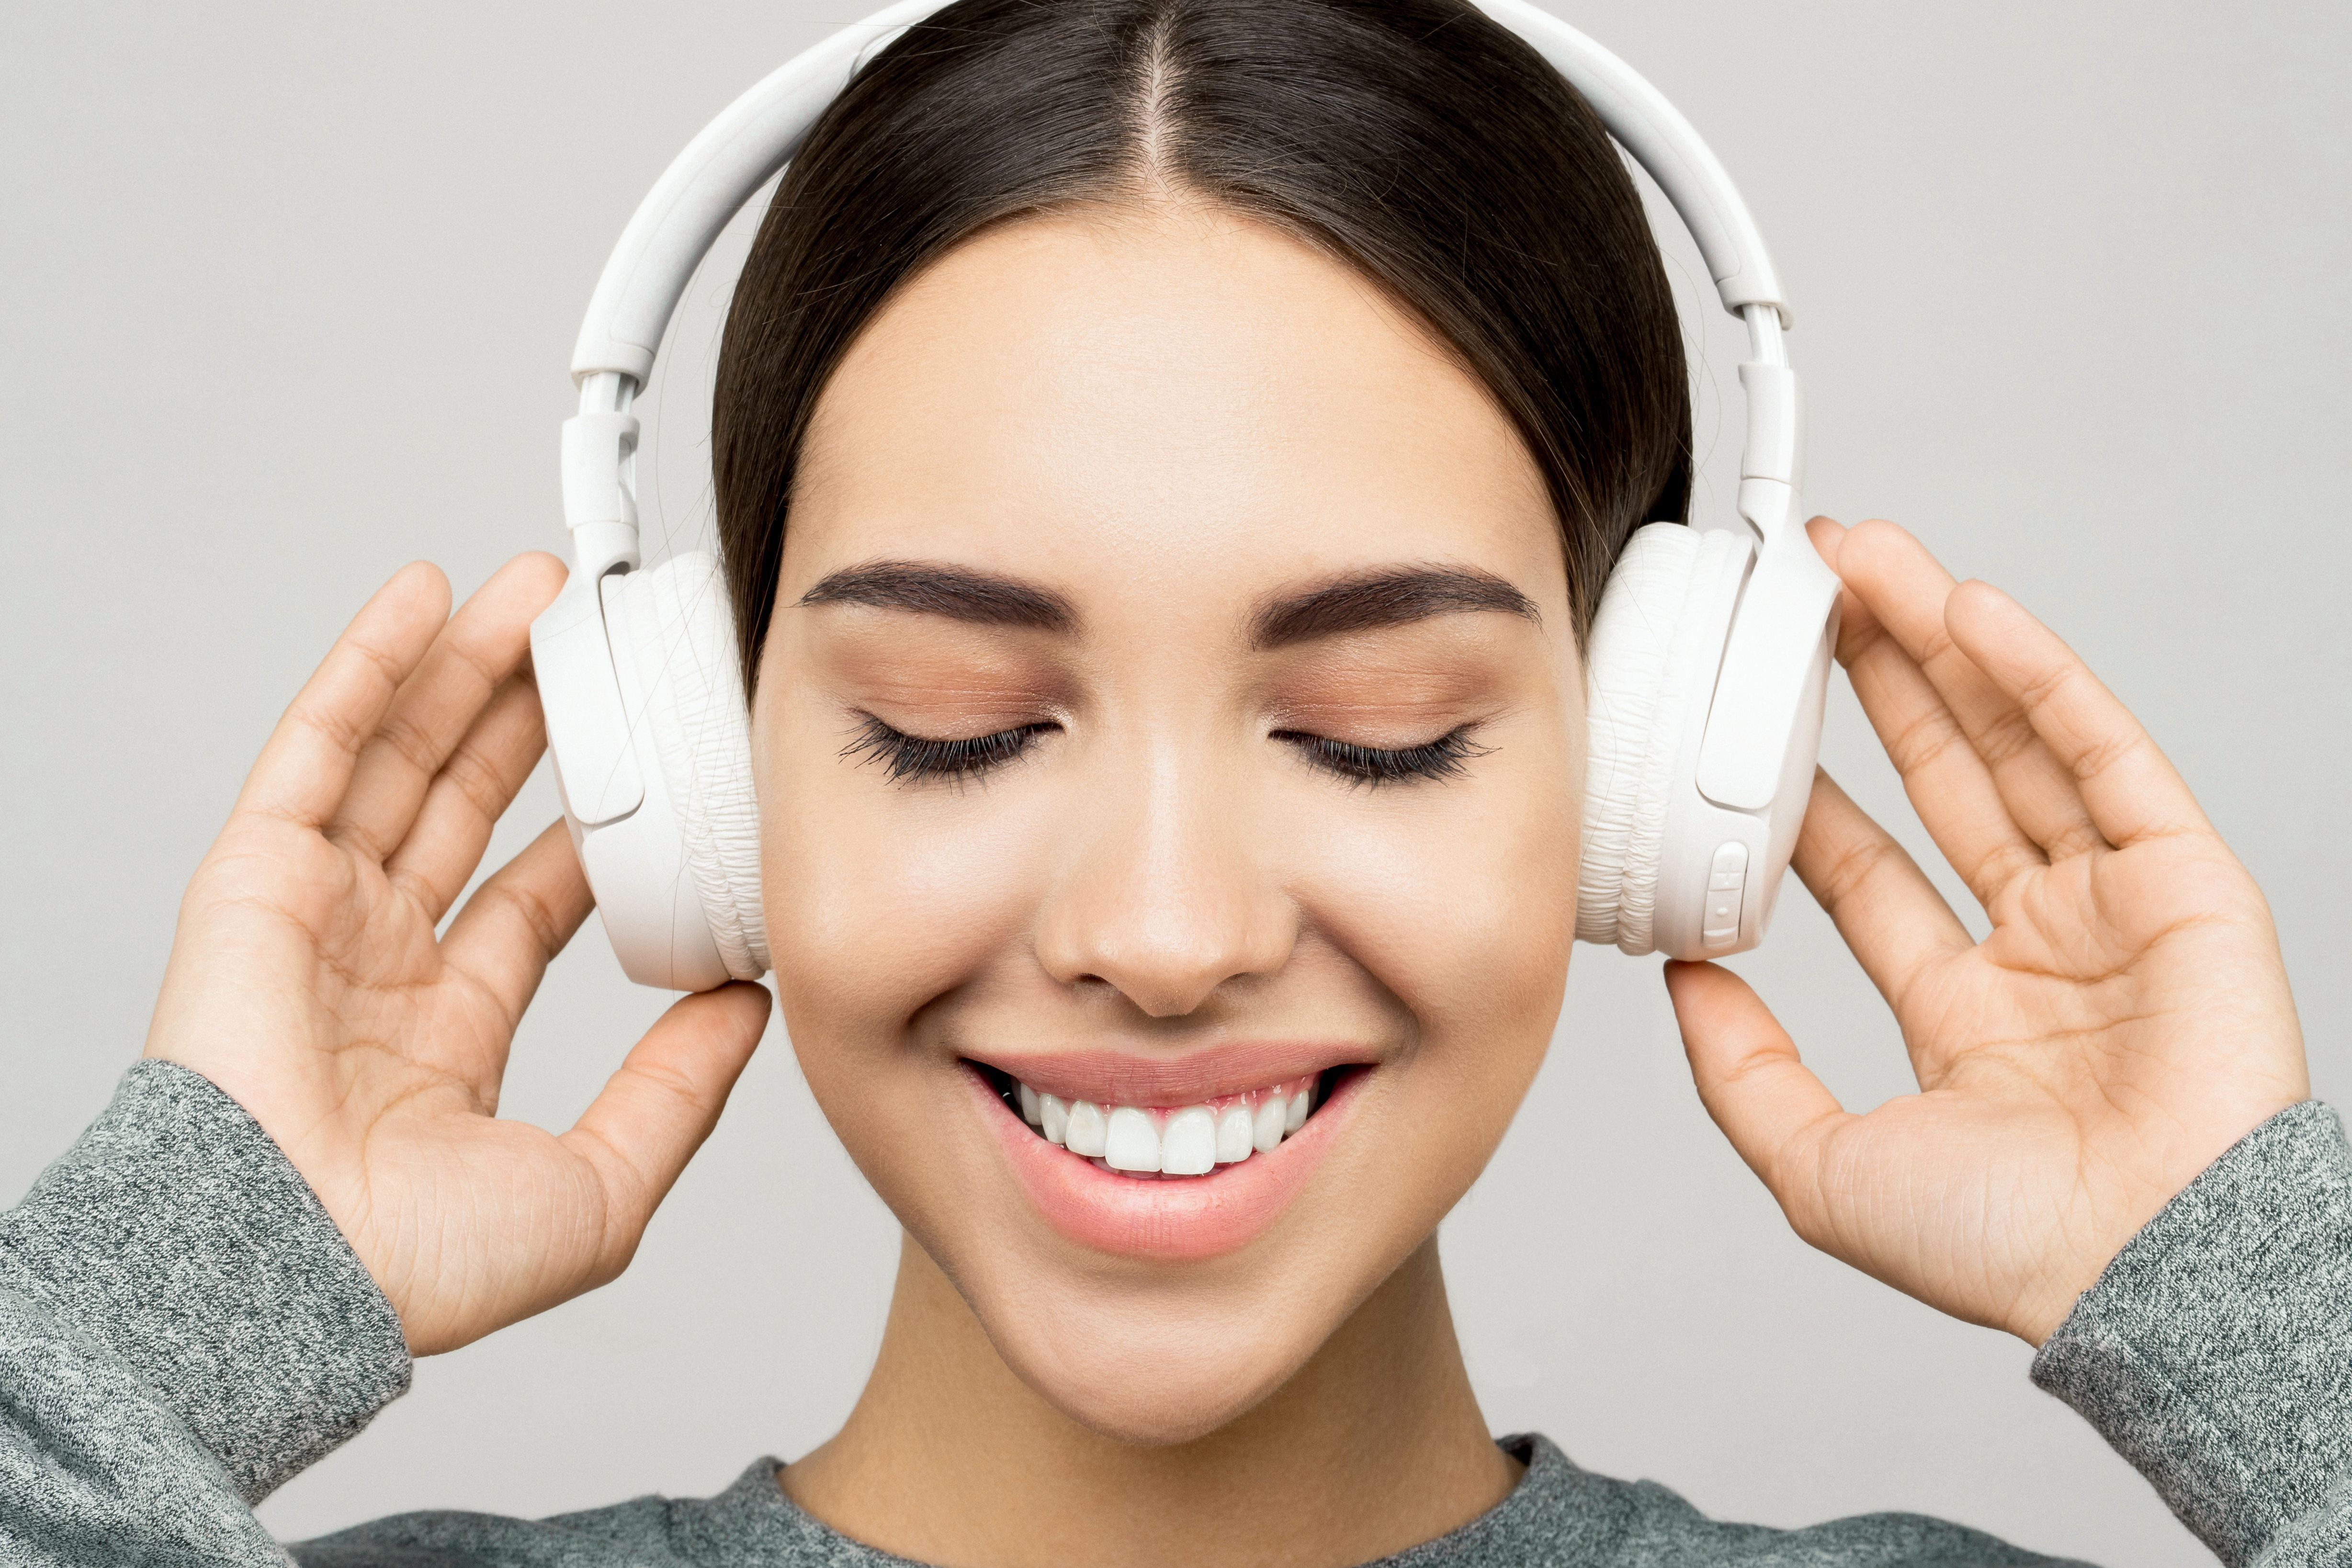 A picture of a woman with headphones on